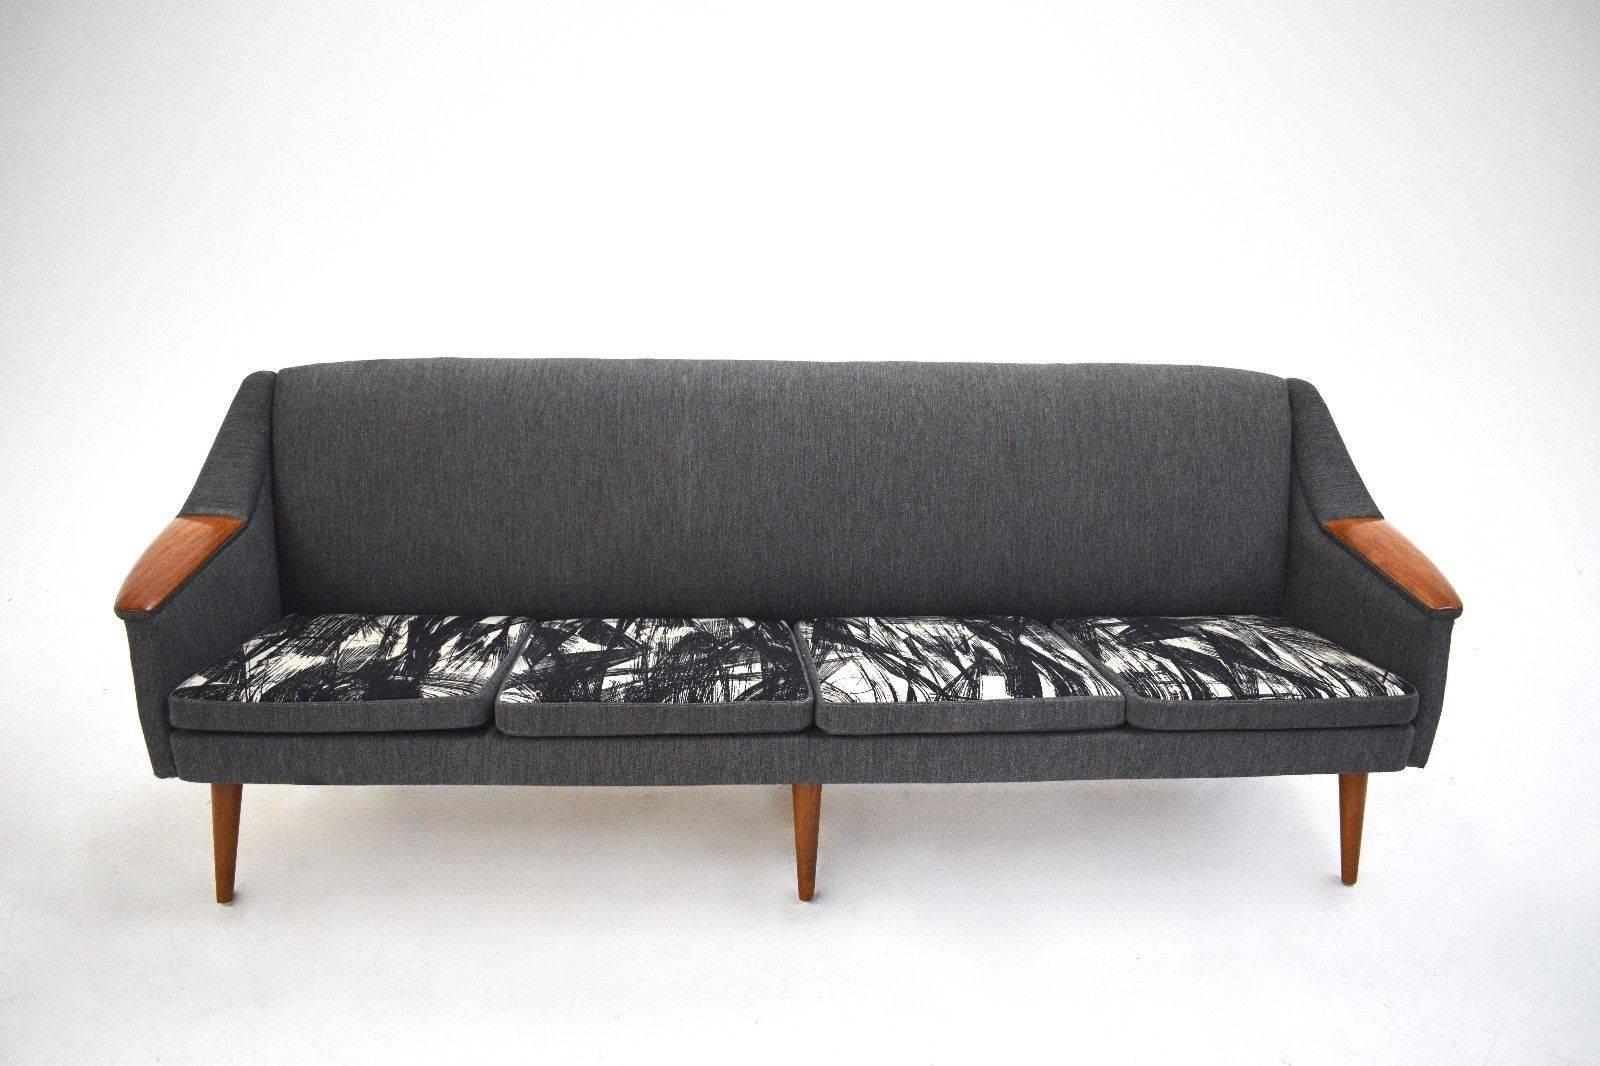 Norwegian Charcoal Grey Wool and Teak Four-Seat Sofa Midcentury, 1960s For Sale 3